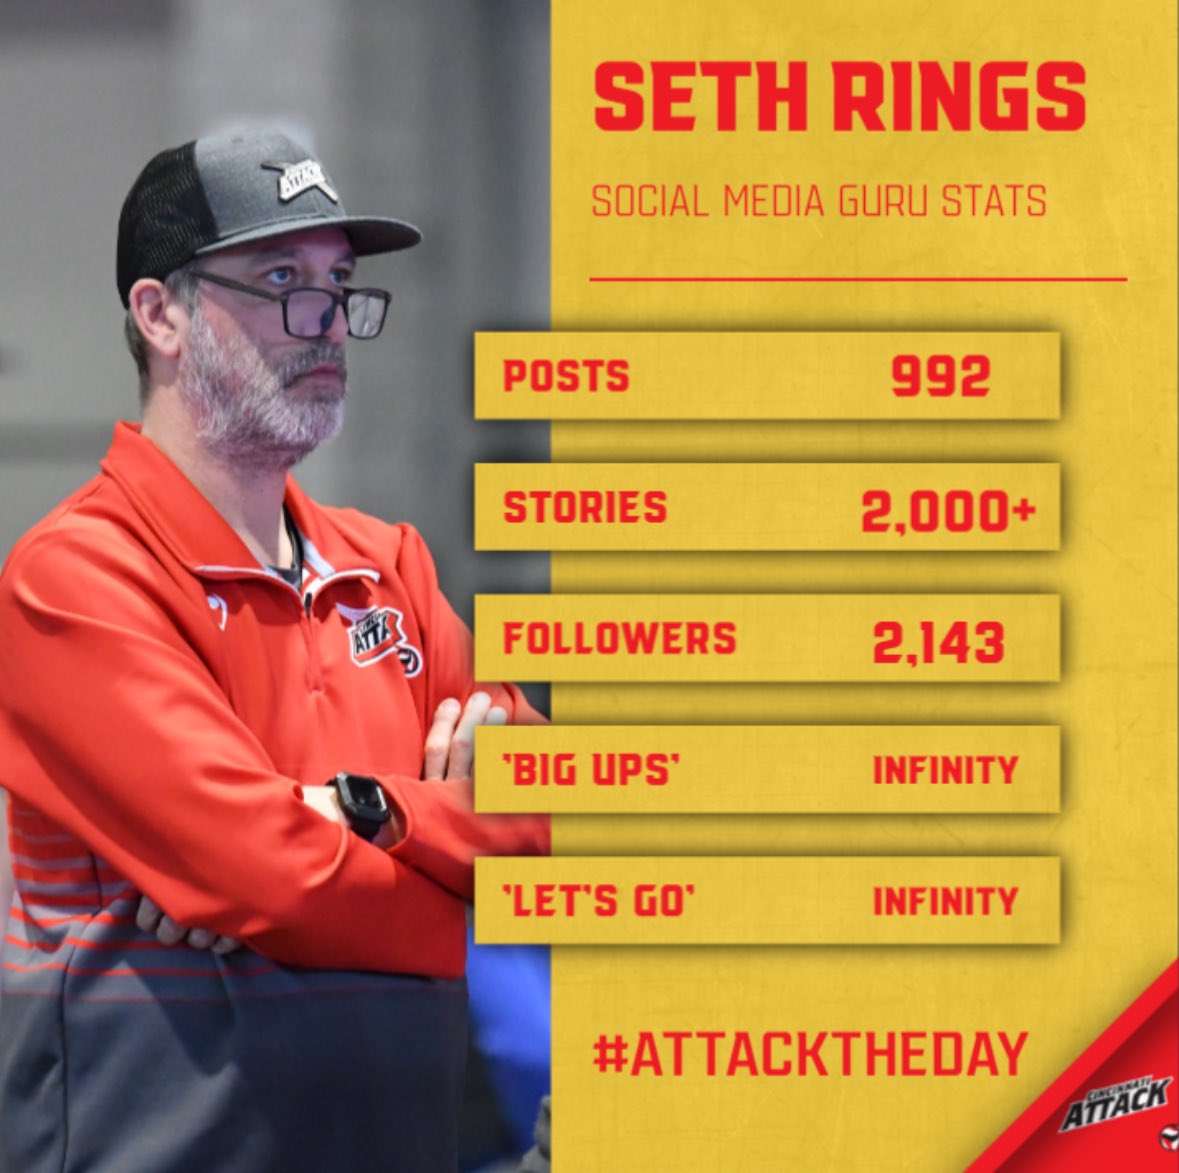 “All good things must come to an end” – We request the biggest of ups for our superb social media guru, Seth Rings! Seth will be ‘retiring’ from his social media role with Attack.

Enjoy ‘retirement’ Seth!
#bigups #letsgo #EPND #GBR #cincinnatiattack#cinciattack